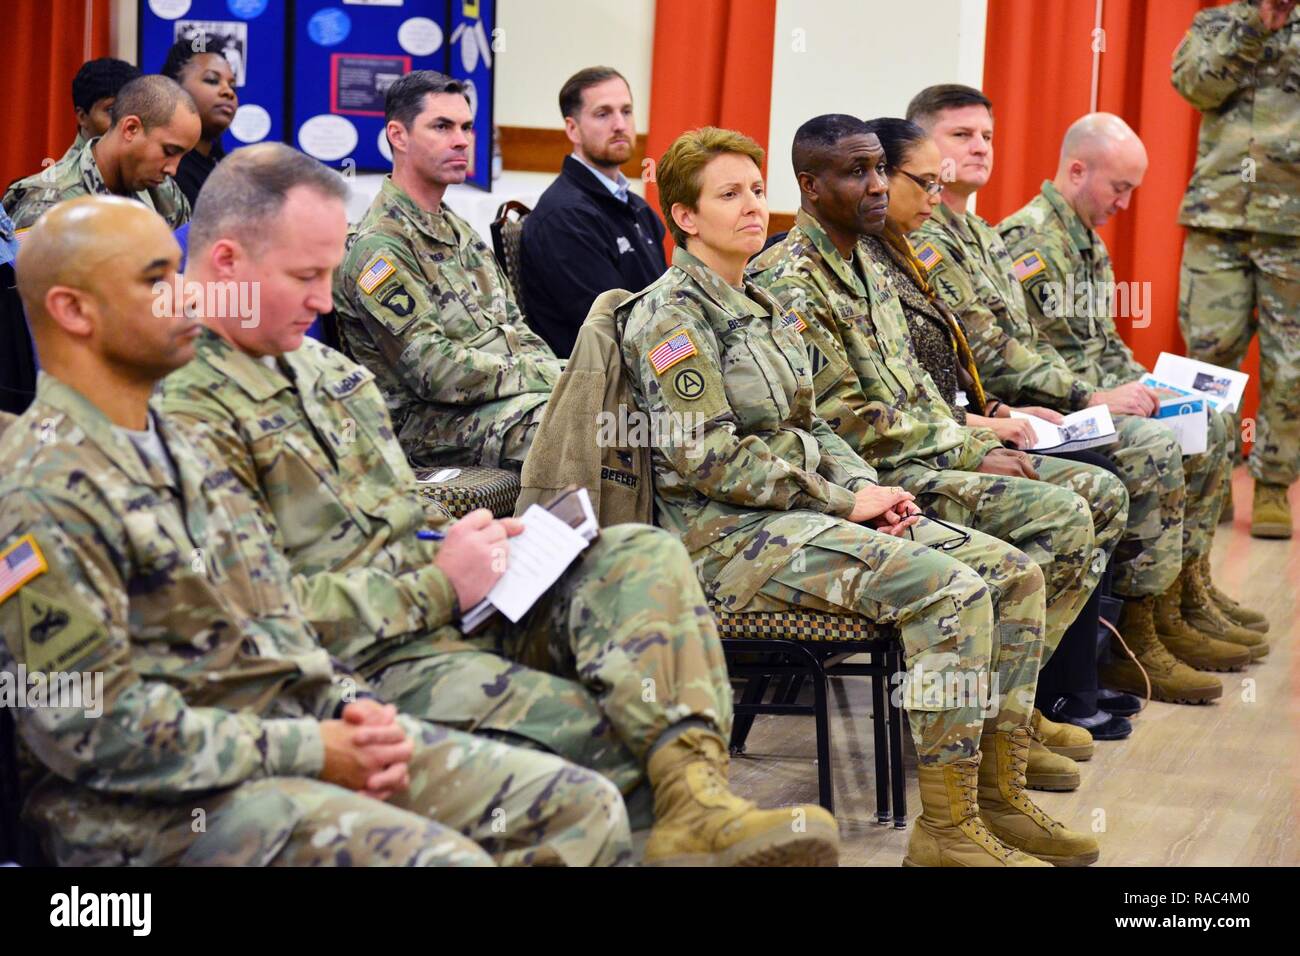 U.S. Army Soldiers and Vicenza Community members, attend the Martin Luther King, Jr. Day observances, at Vicenza Military Community’s 2017 Observance Ceremony at Caserma Ederle, Vicenza, Italy, Jan. 10, 2017. Stock Photo